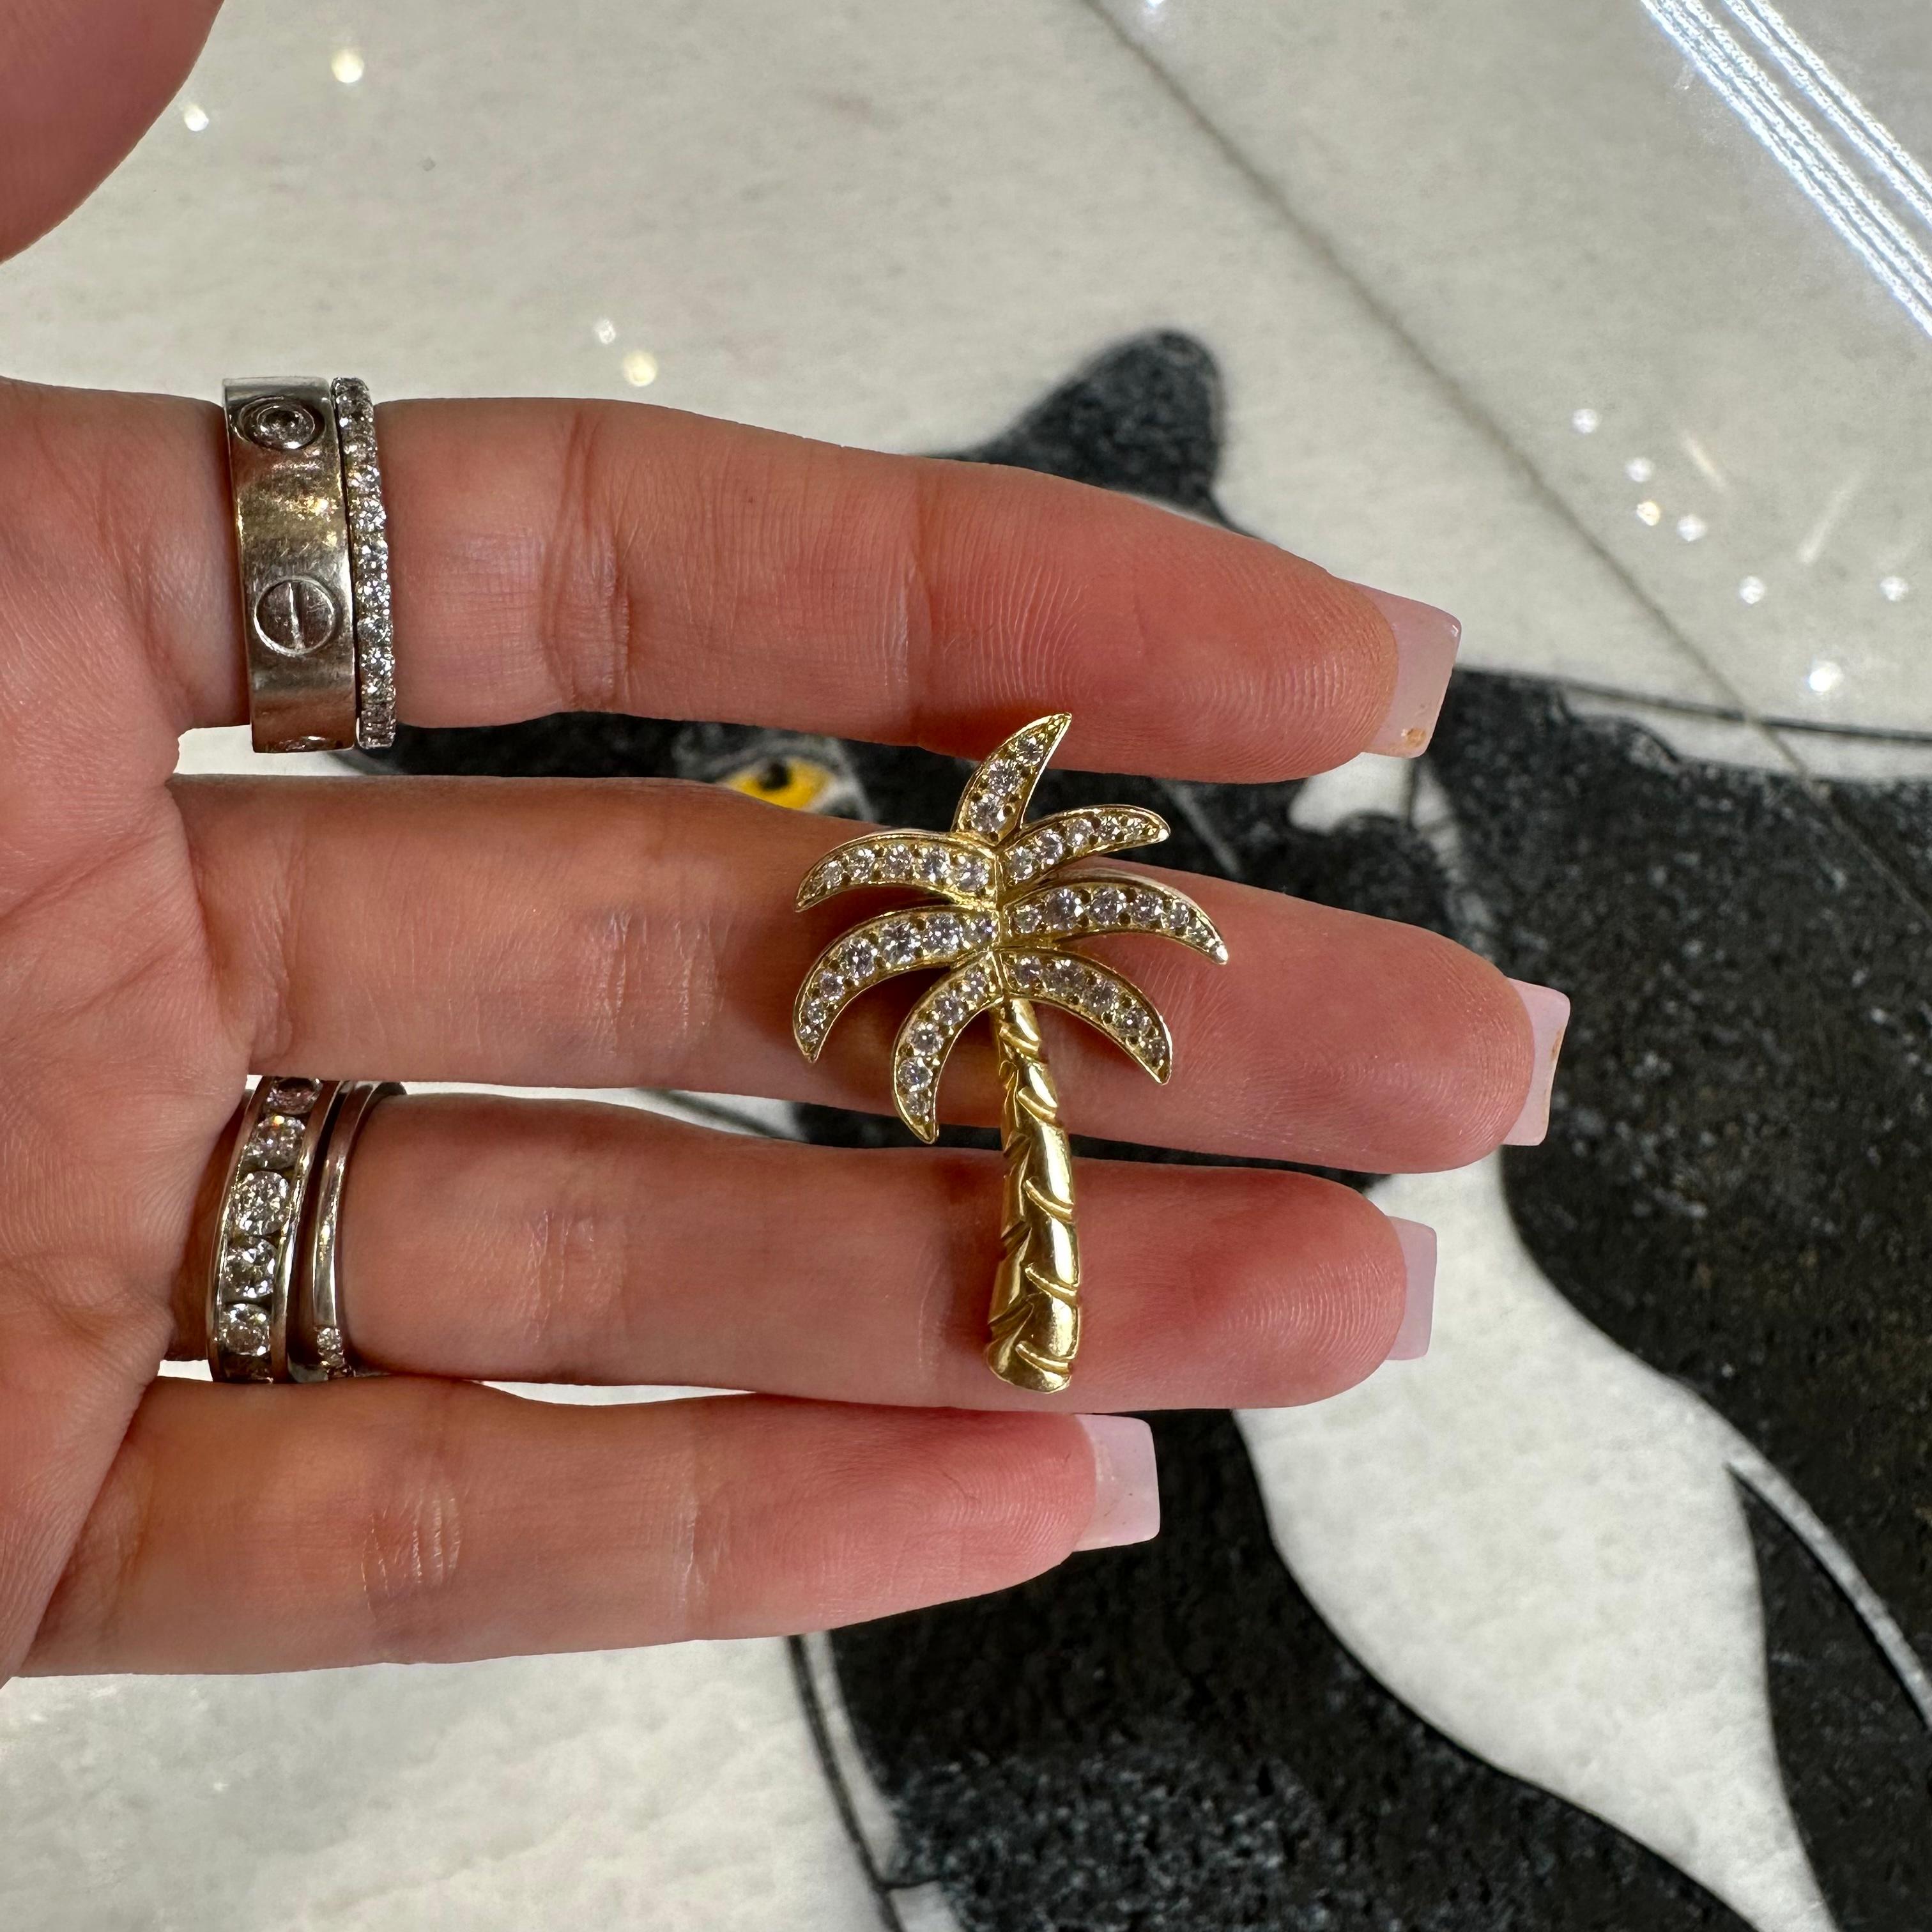 Designer: Jason Of Beverly Hills

Style: Palm Tree Pendant

Metal: Yellow Gold

Metal Purity: 14K

Stones: 37 Diamonds

Total Carat Weight (ct): 0.96 ct

Total Item Weight (g): 8.8 g 

Item Length: 3.5 in

Item Width (in): 2.2 in
Includes: 24 Month